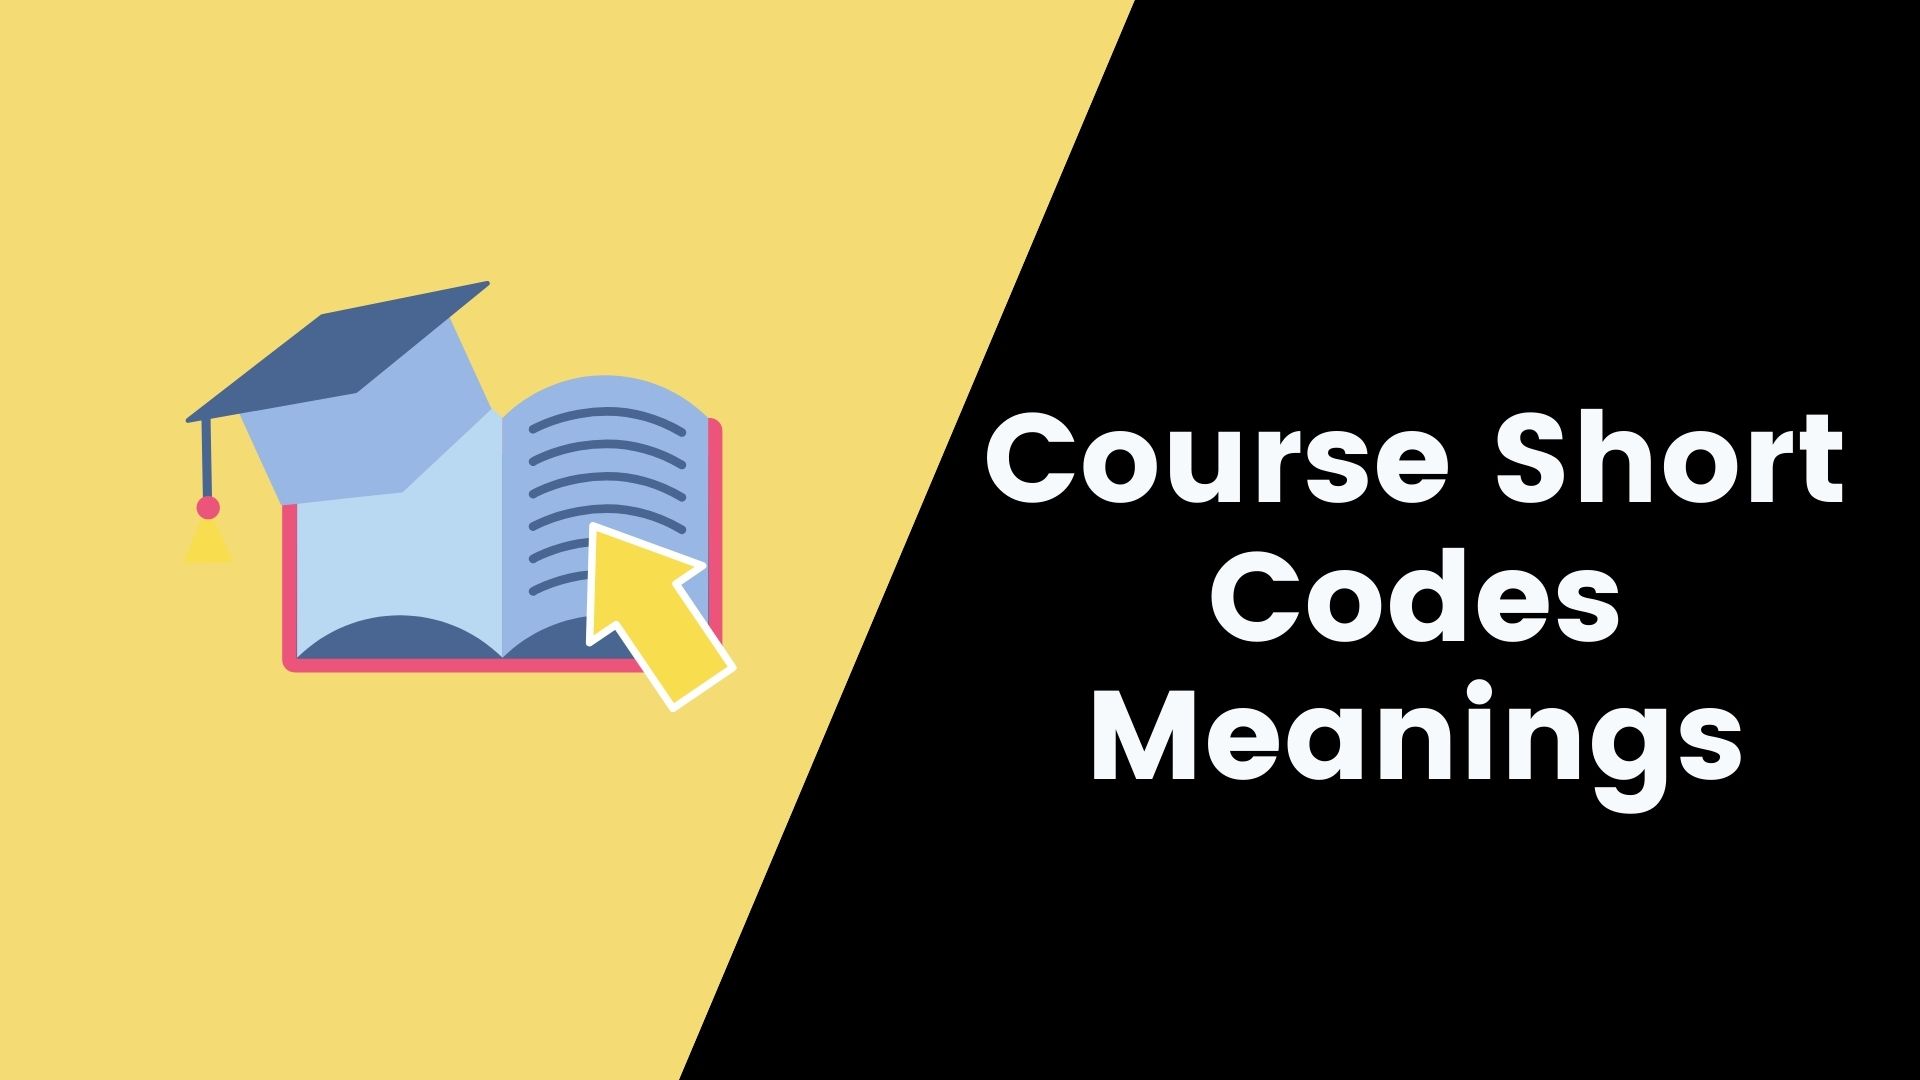 Degree Courses short codes and their meanings